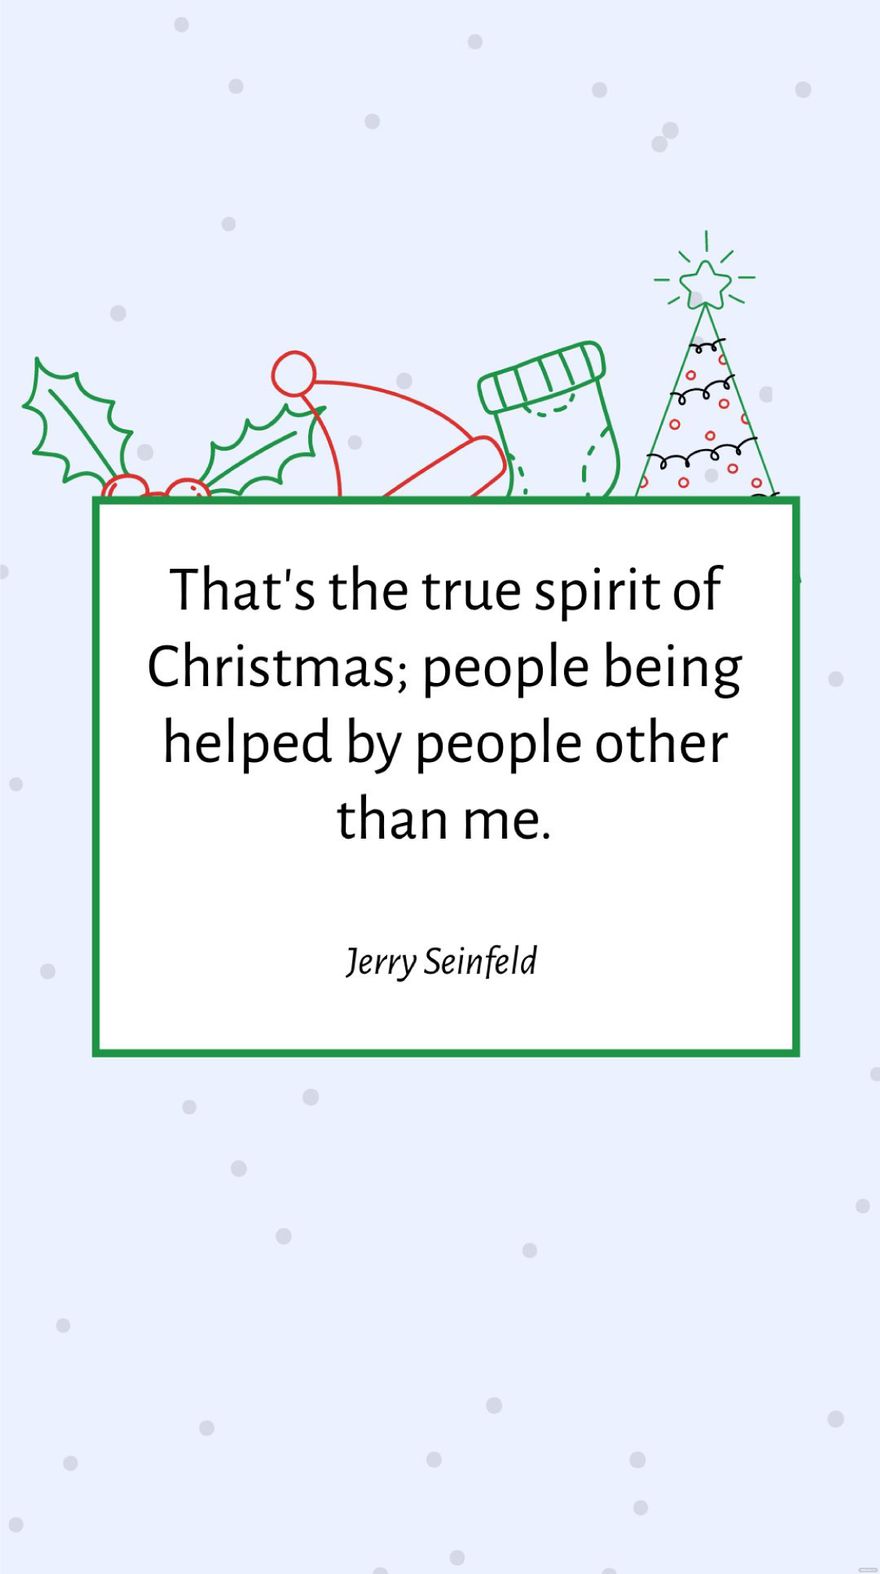 Jerry Seinfeld - That's the true spirit of Christmas; people being helped by people other than me.